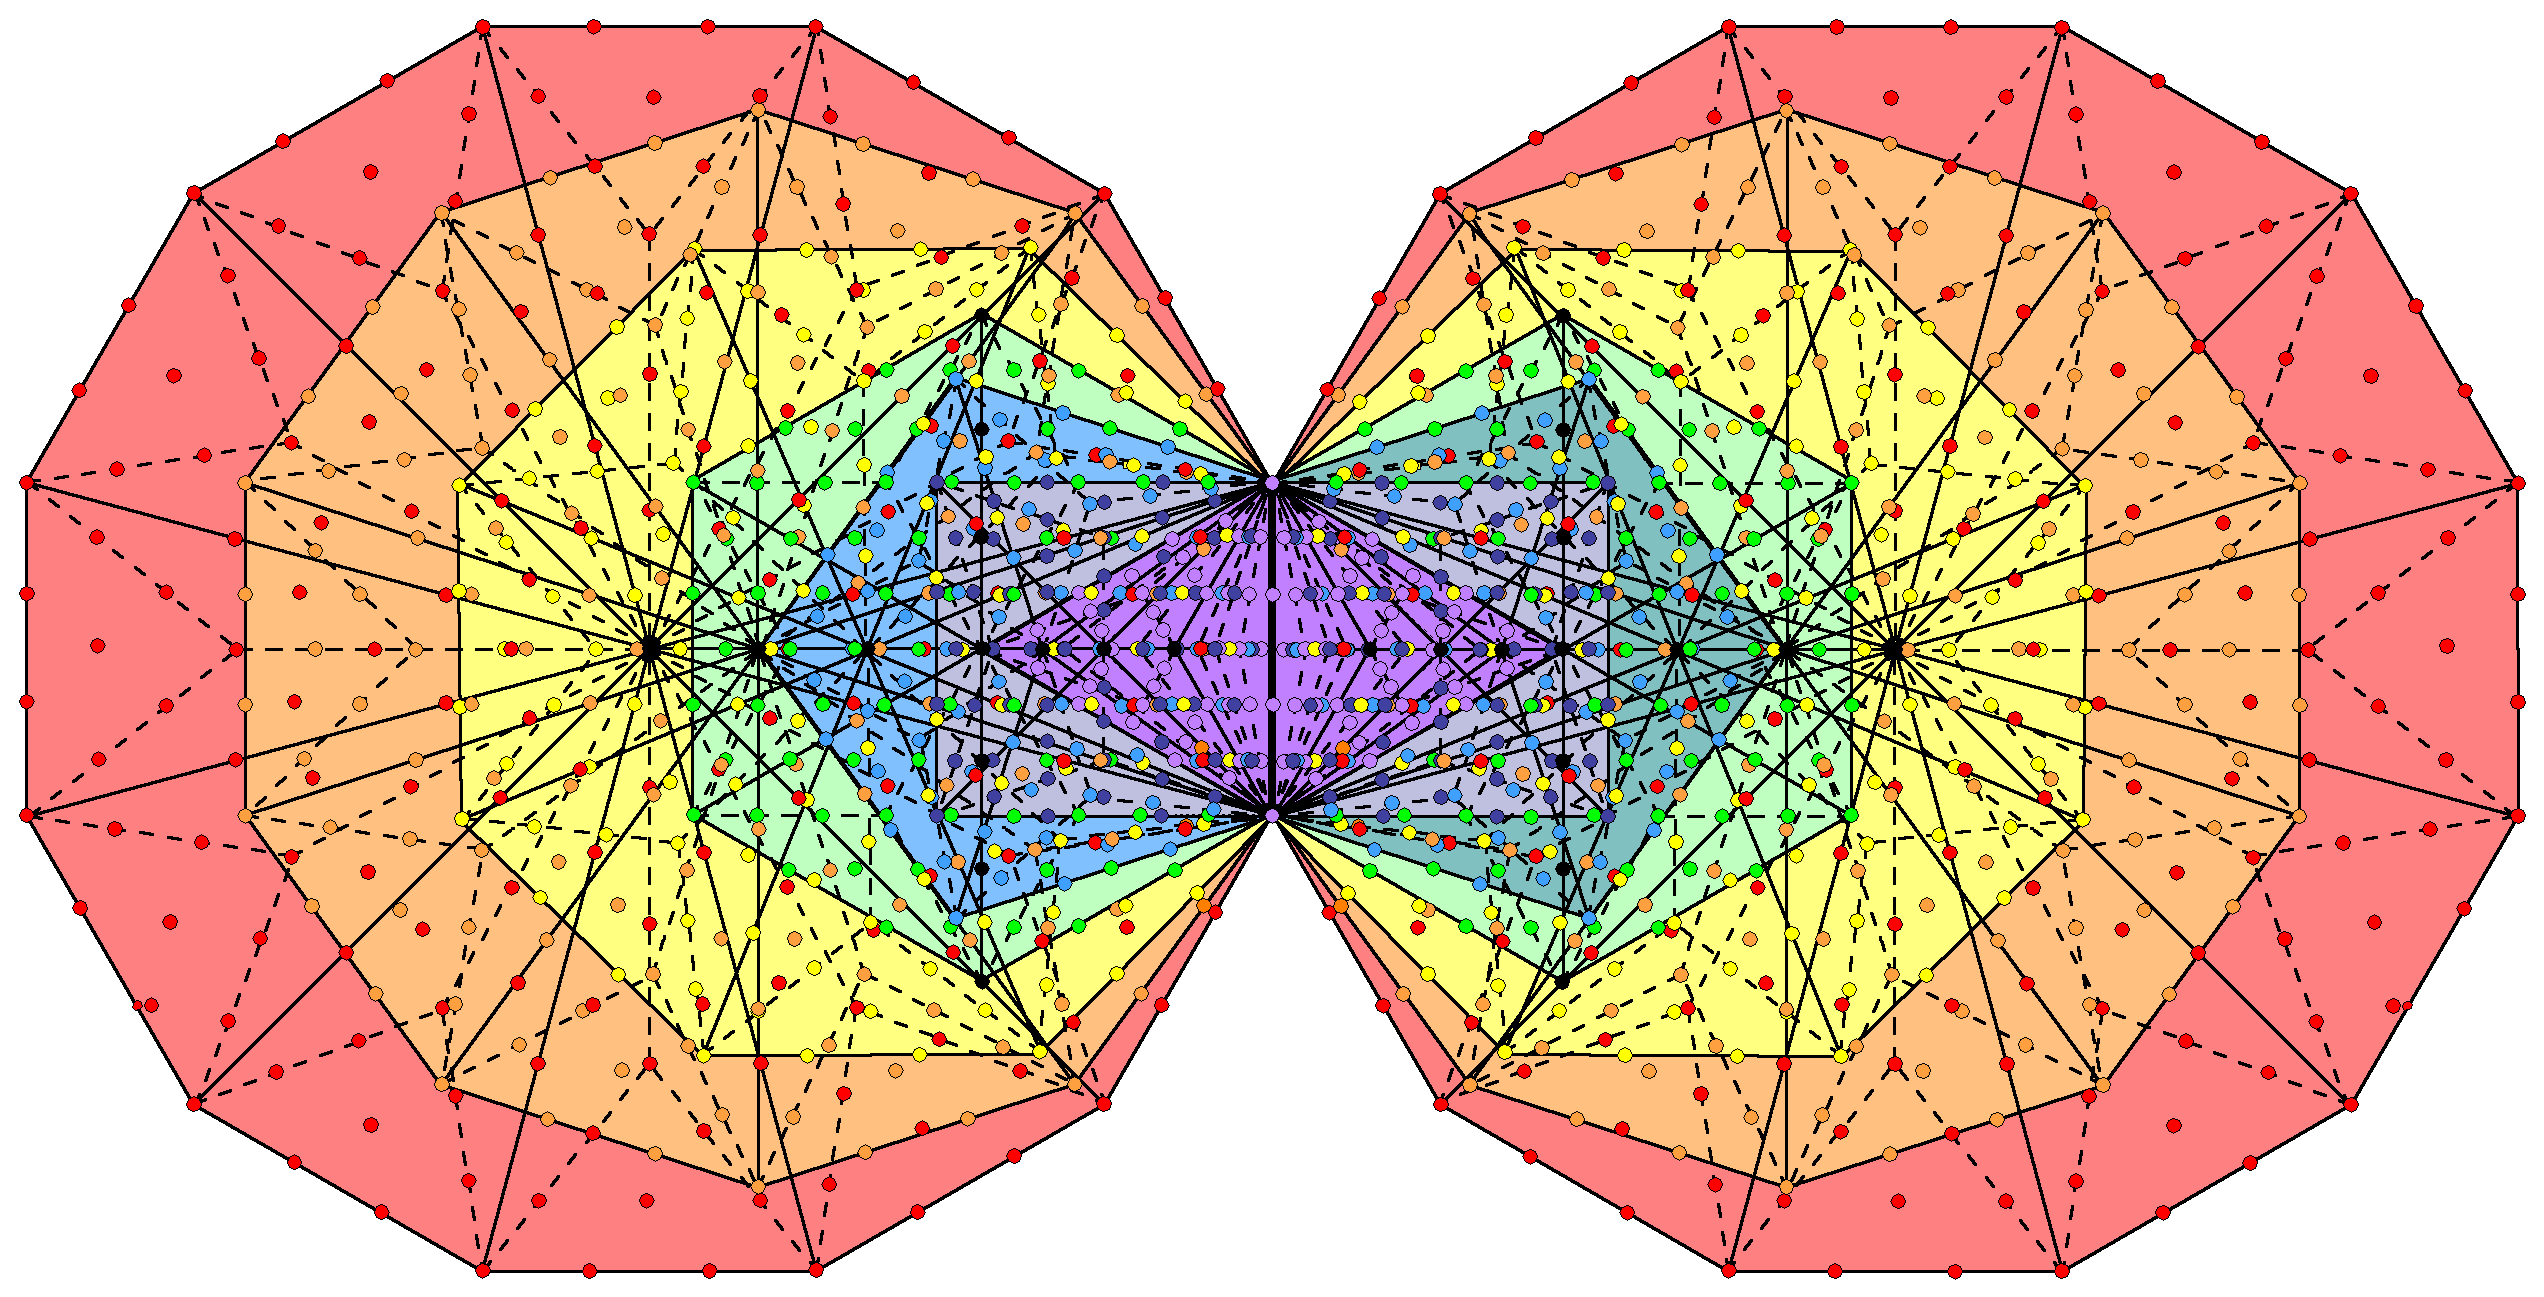 672 intrinsic yods surrounding centres associated with each set of 7 enfolded Type B polygons